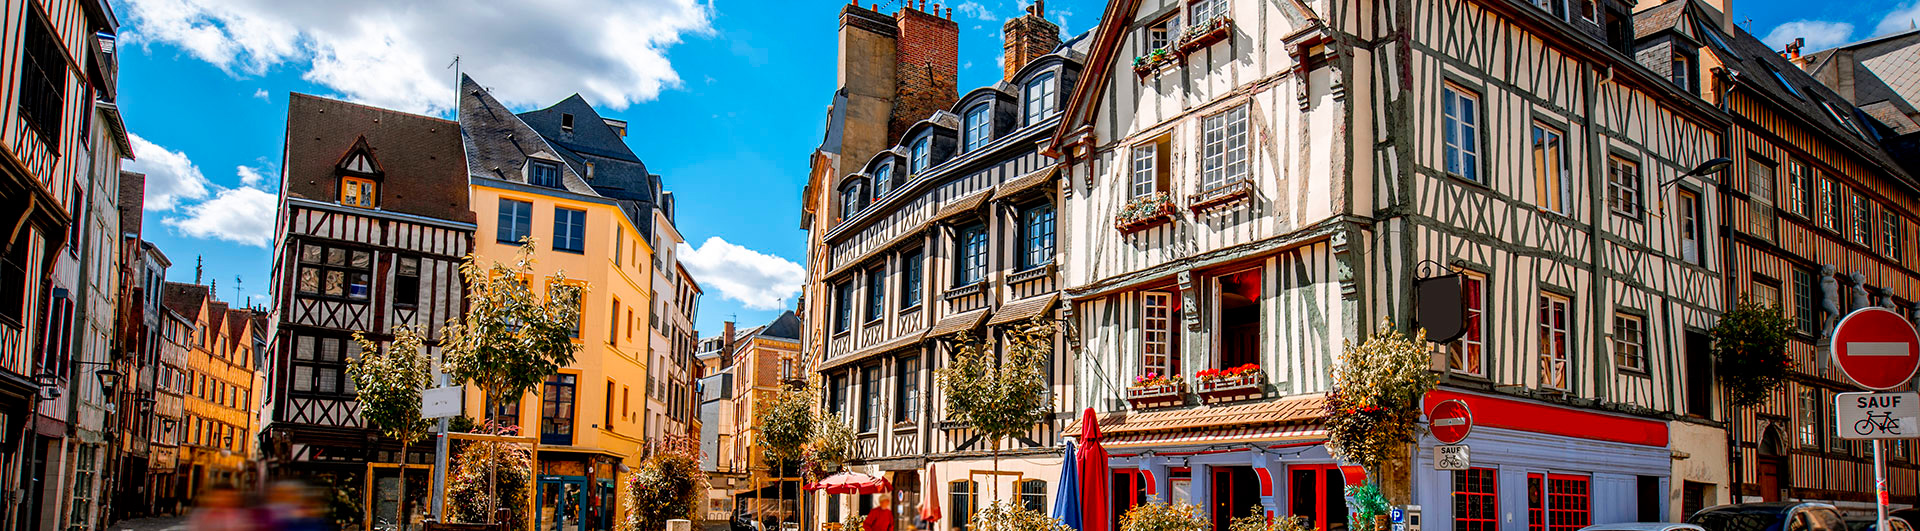 Fun guided tour of Rouen for the whole family